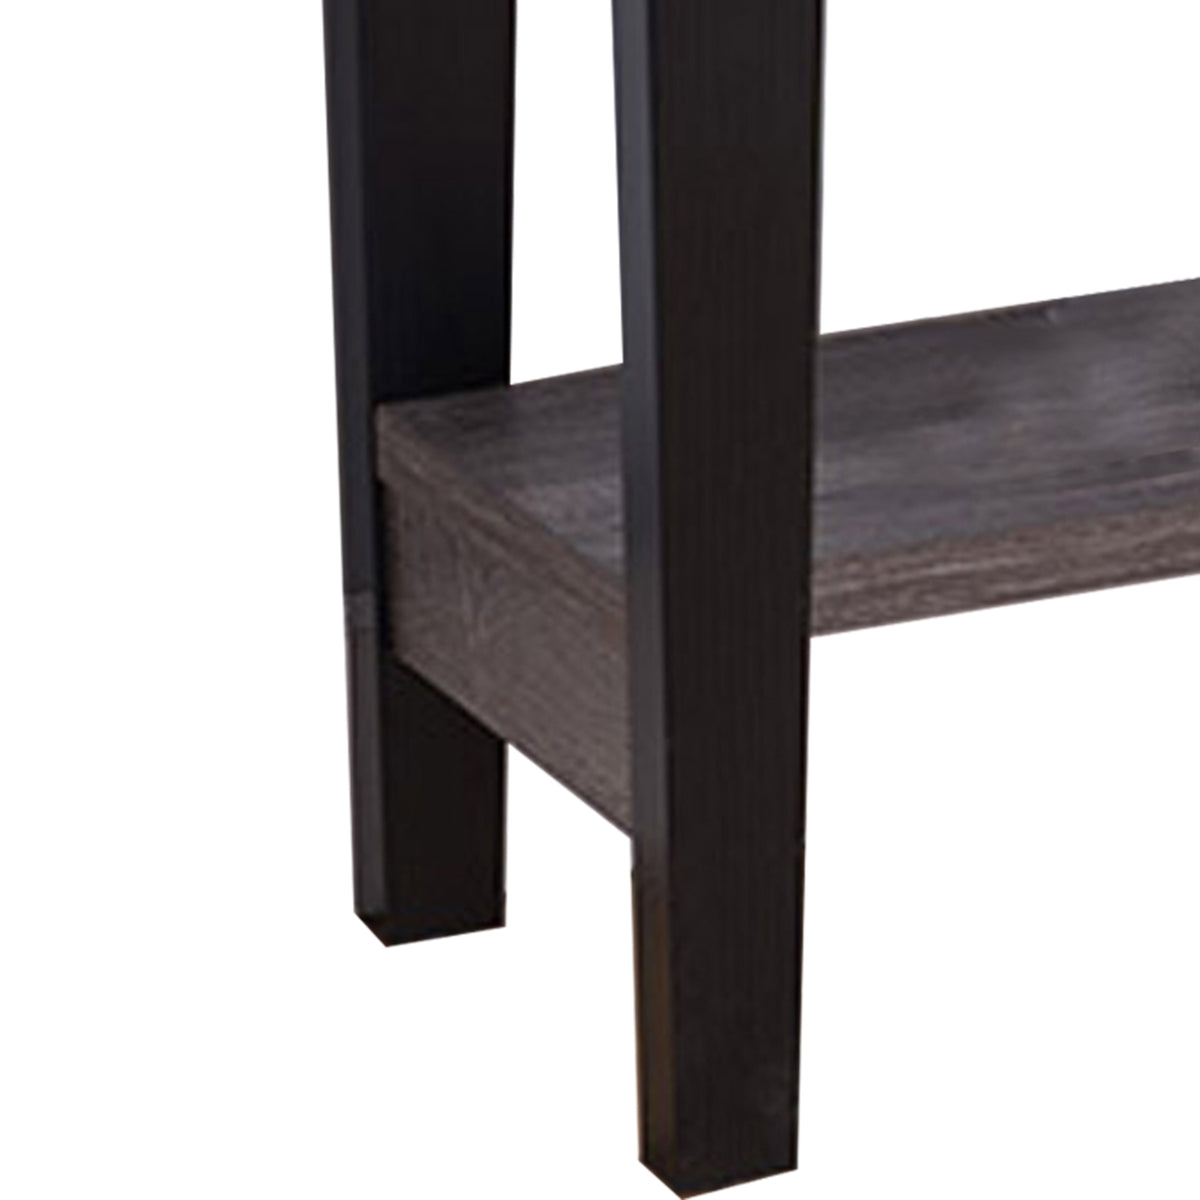 Wooden Console Table With Bottom Shelf, Black And Gray - BM179698